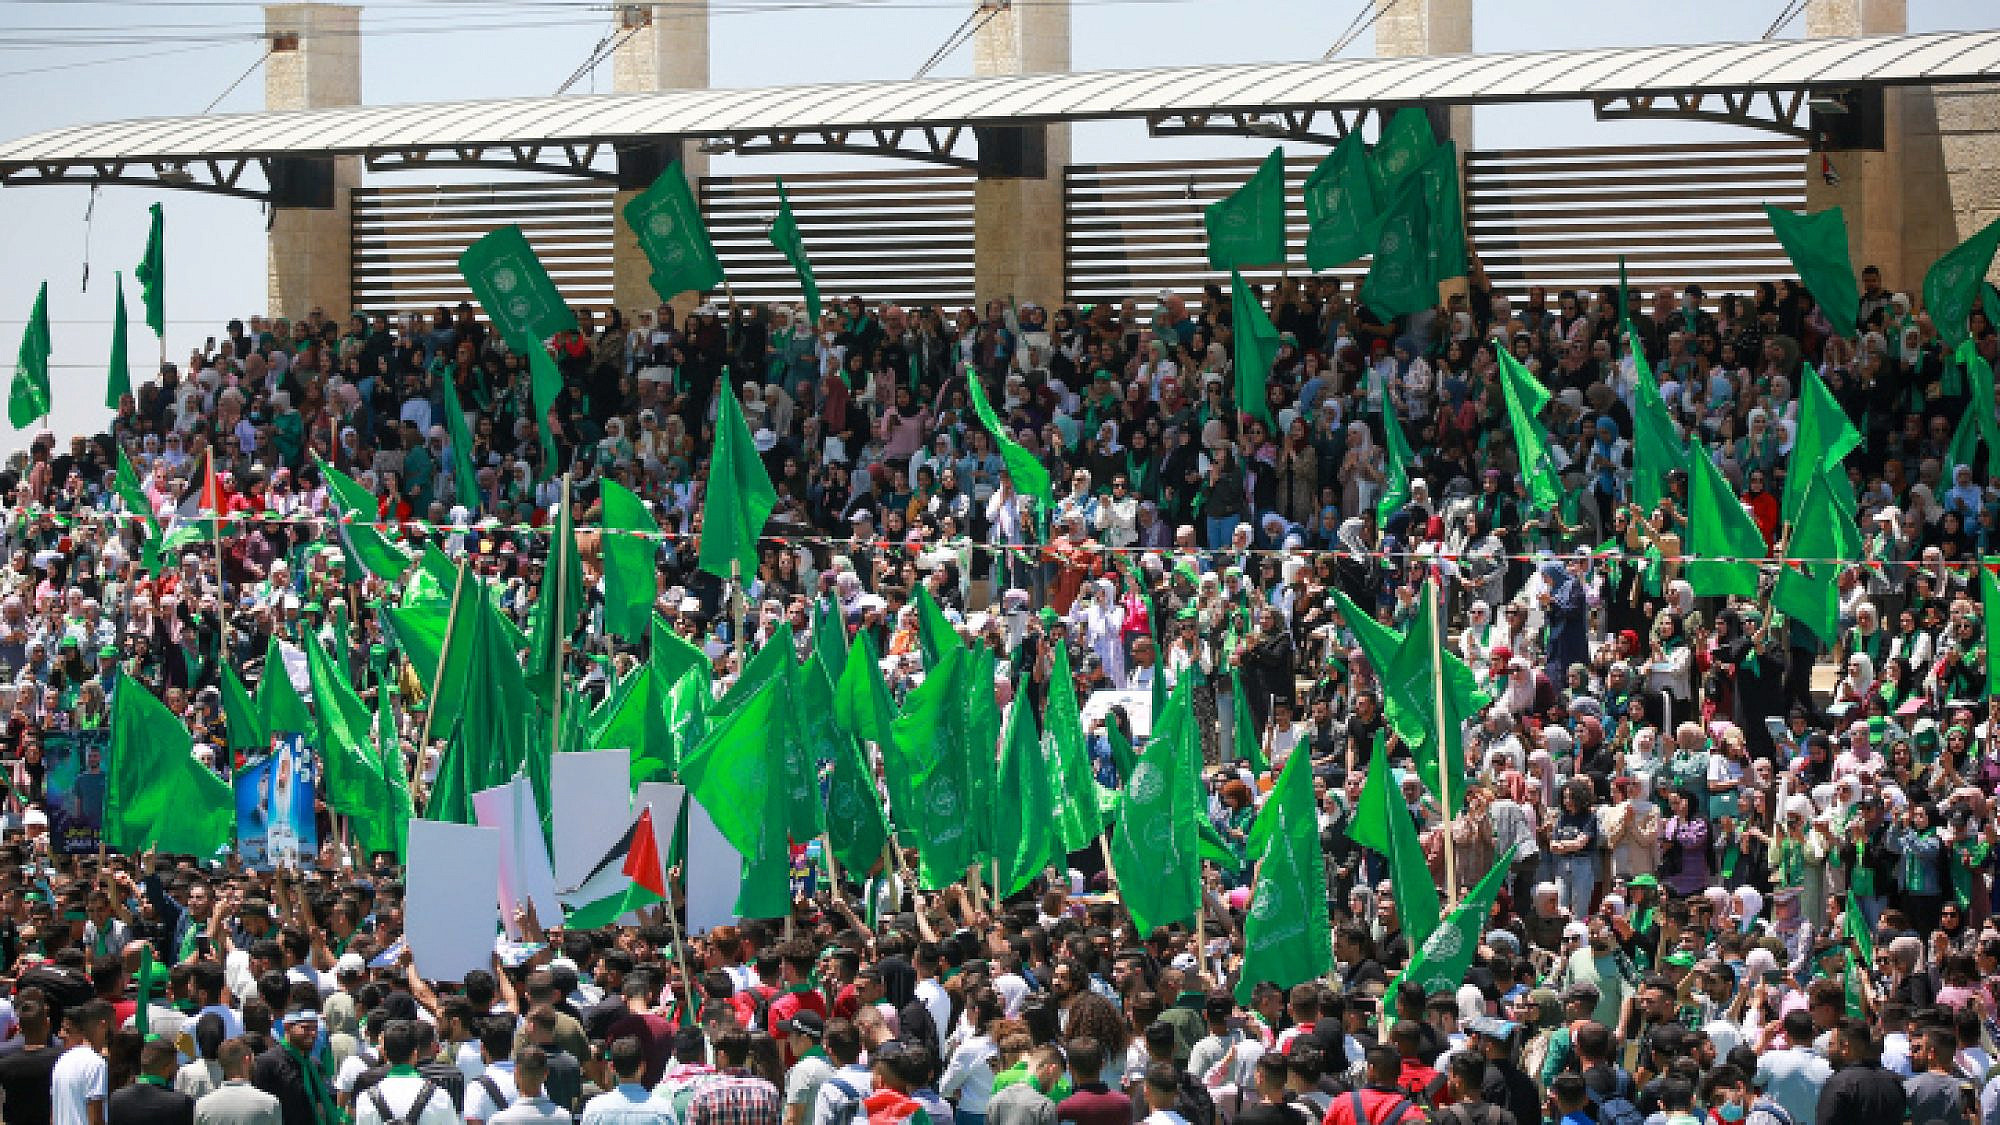 Hamas supporters wave the terrorist movement's flag during a student rally at Birzeit University, near Ramallah, May 19, 2022. Credit: Flash90.